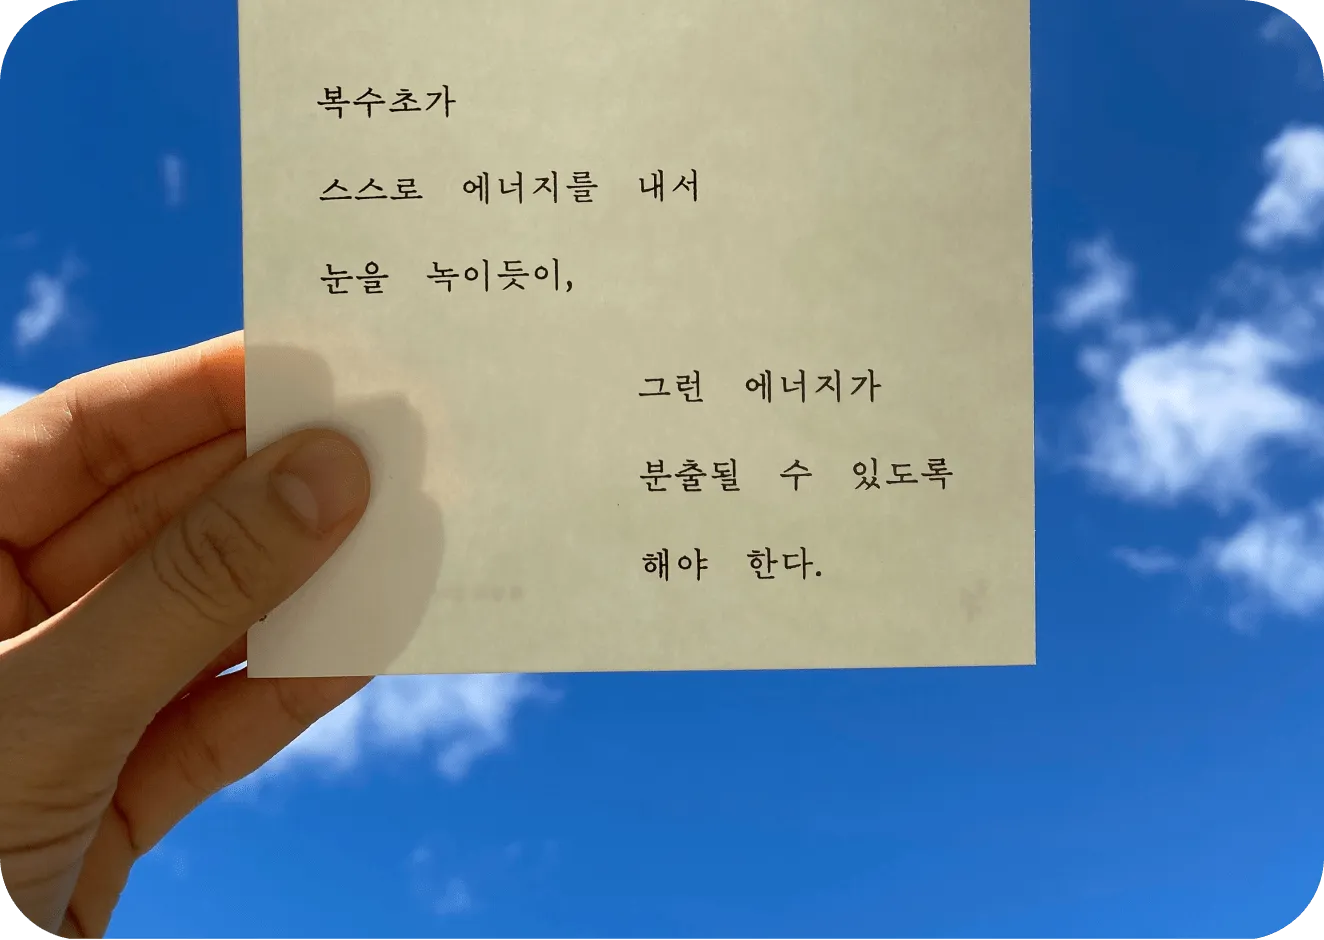 An image of a Lens shopping use case featuring a hand holding a Korean poem on a piece of paper against a blue sky.